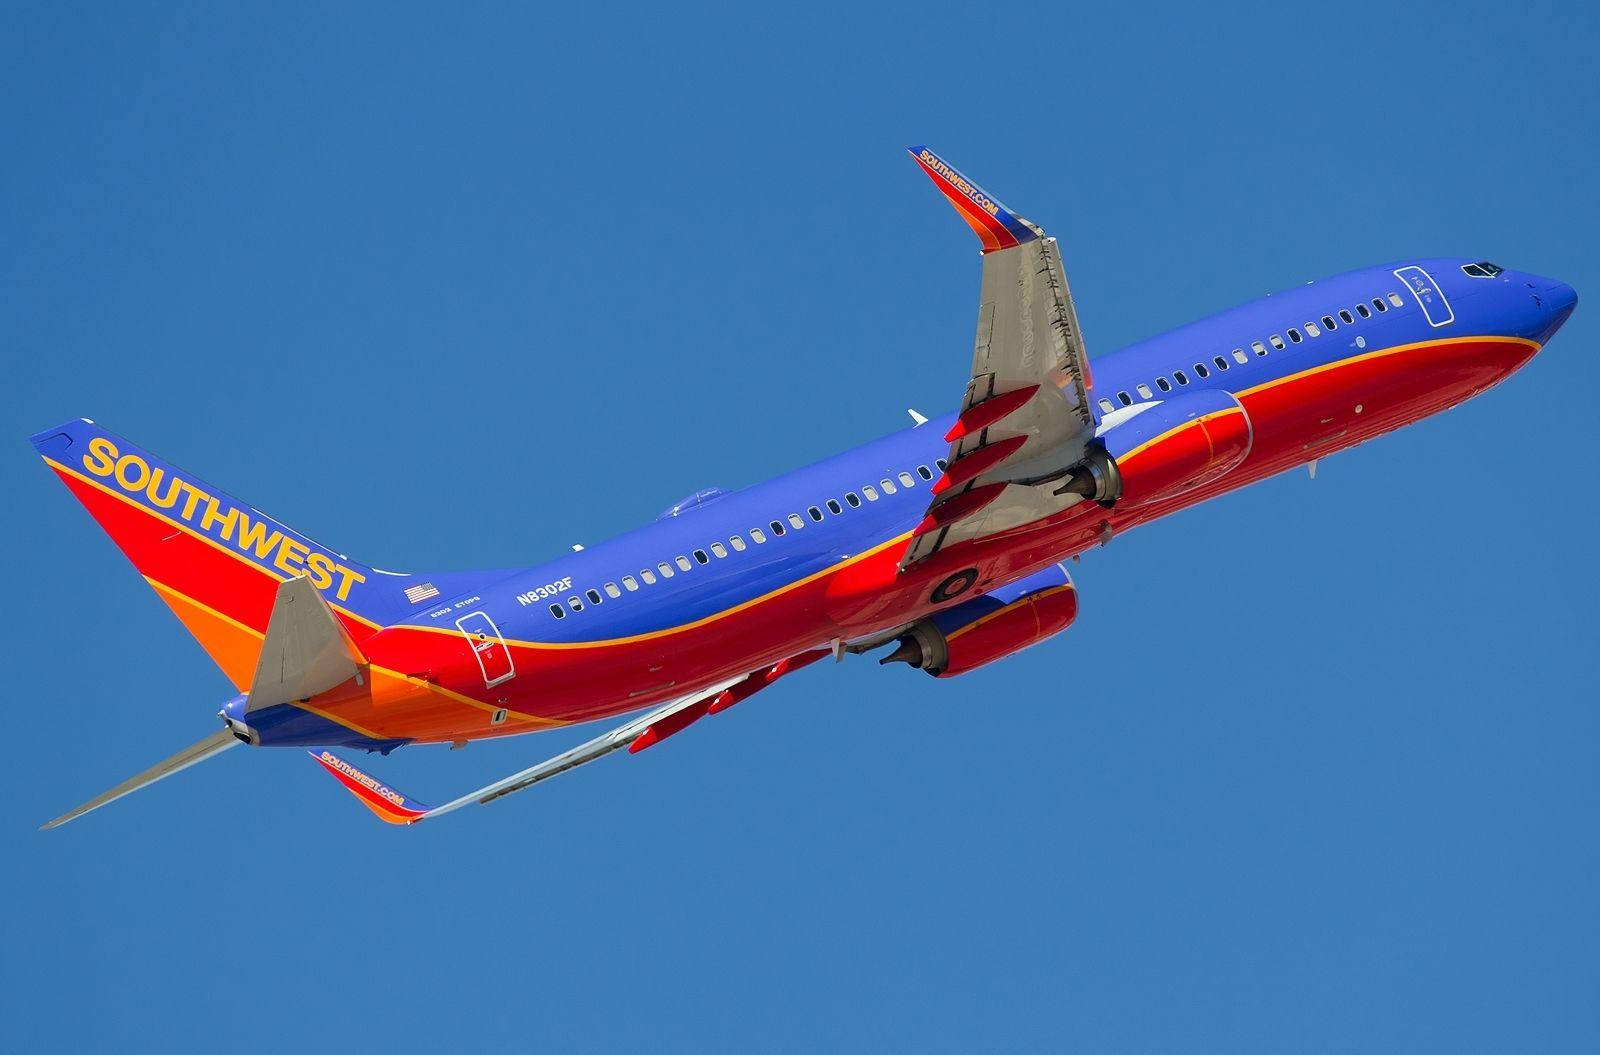 Red Blue Plane Southwest Airlines Wallpaper